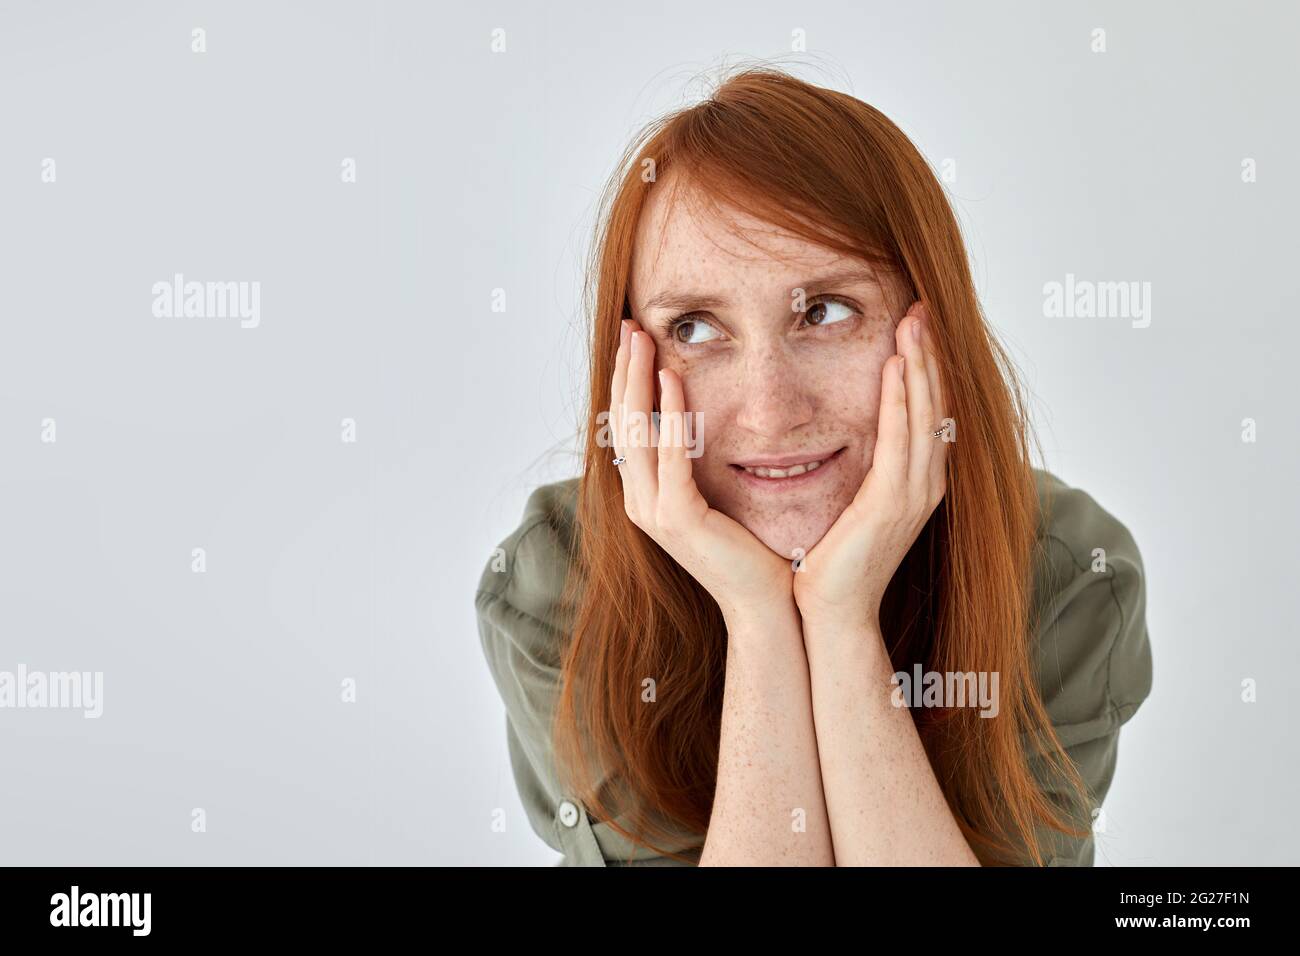 Positive female with ginger hair keeping hands on cheeks and looking away against white background Stock Photo